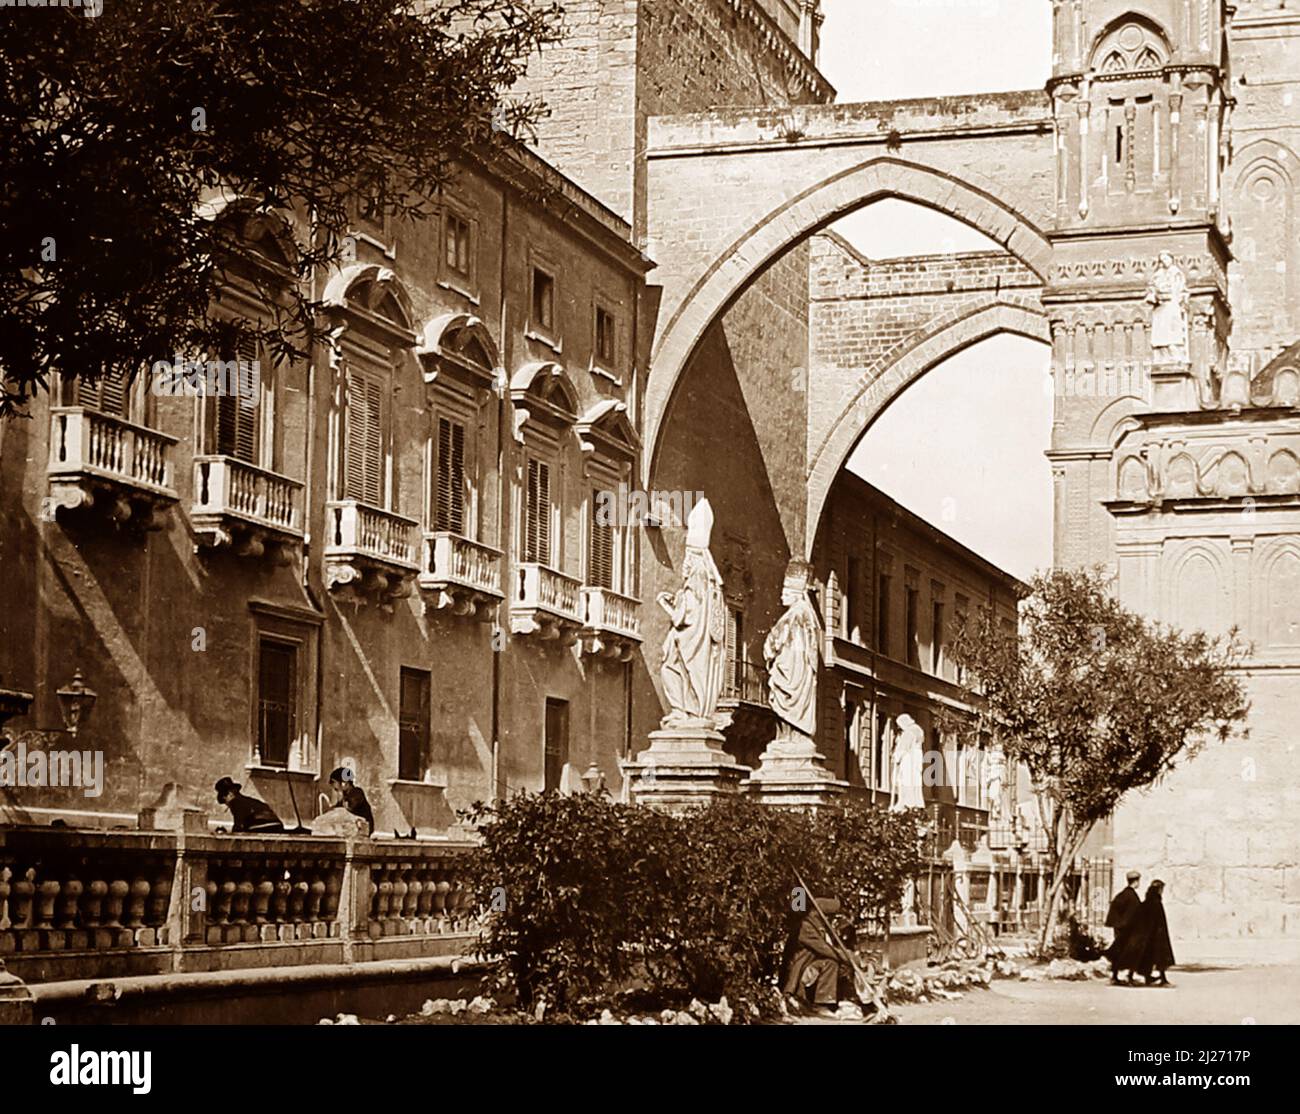 Palermo Cathedral, Sicily, Italy, early 1900s Stock Photo